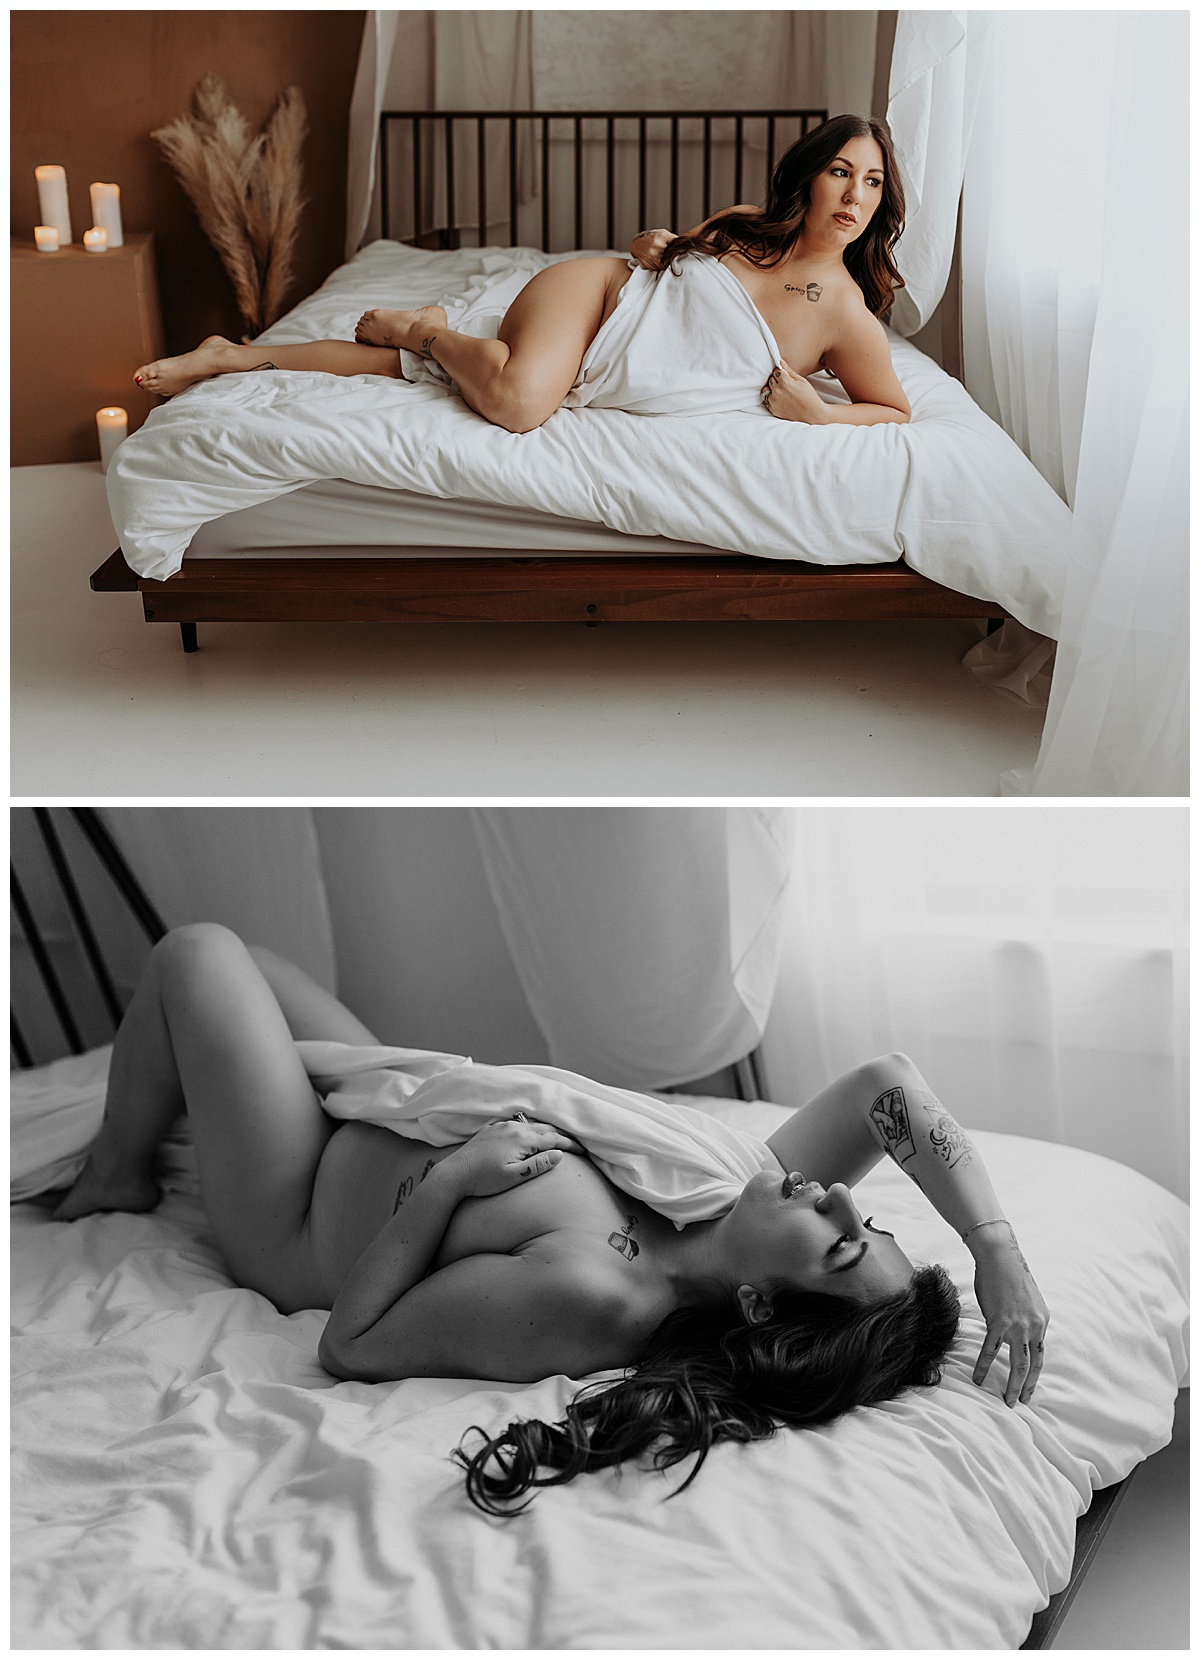 Adult covers body with sheet Minneapolis Boudoir Photographer